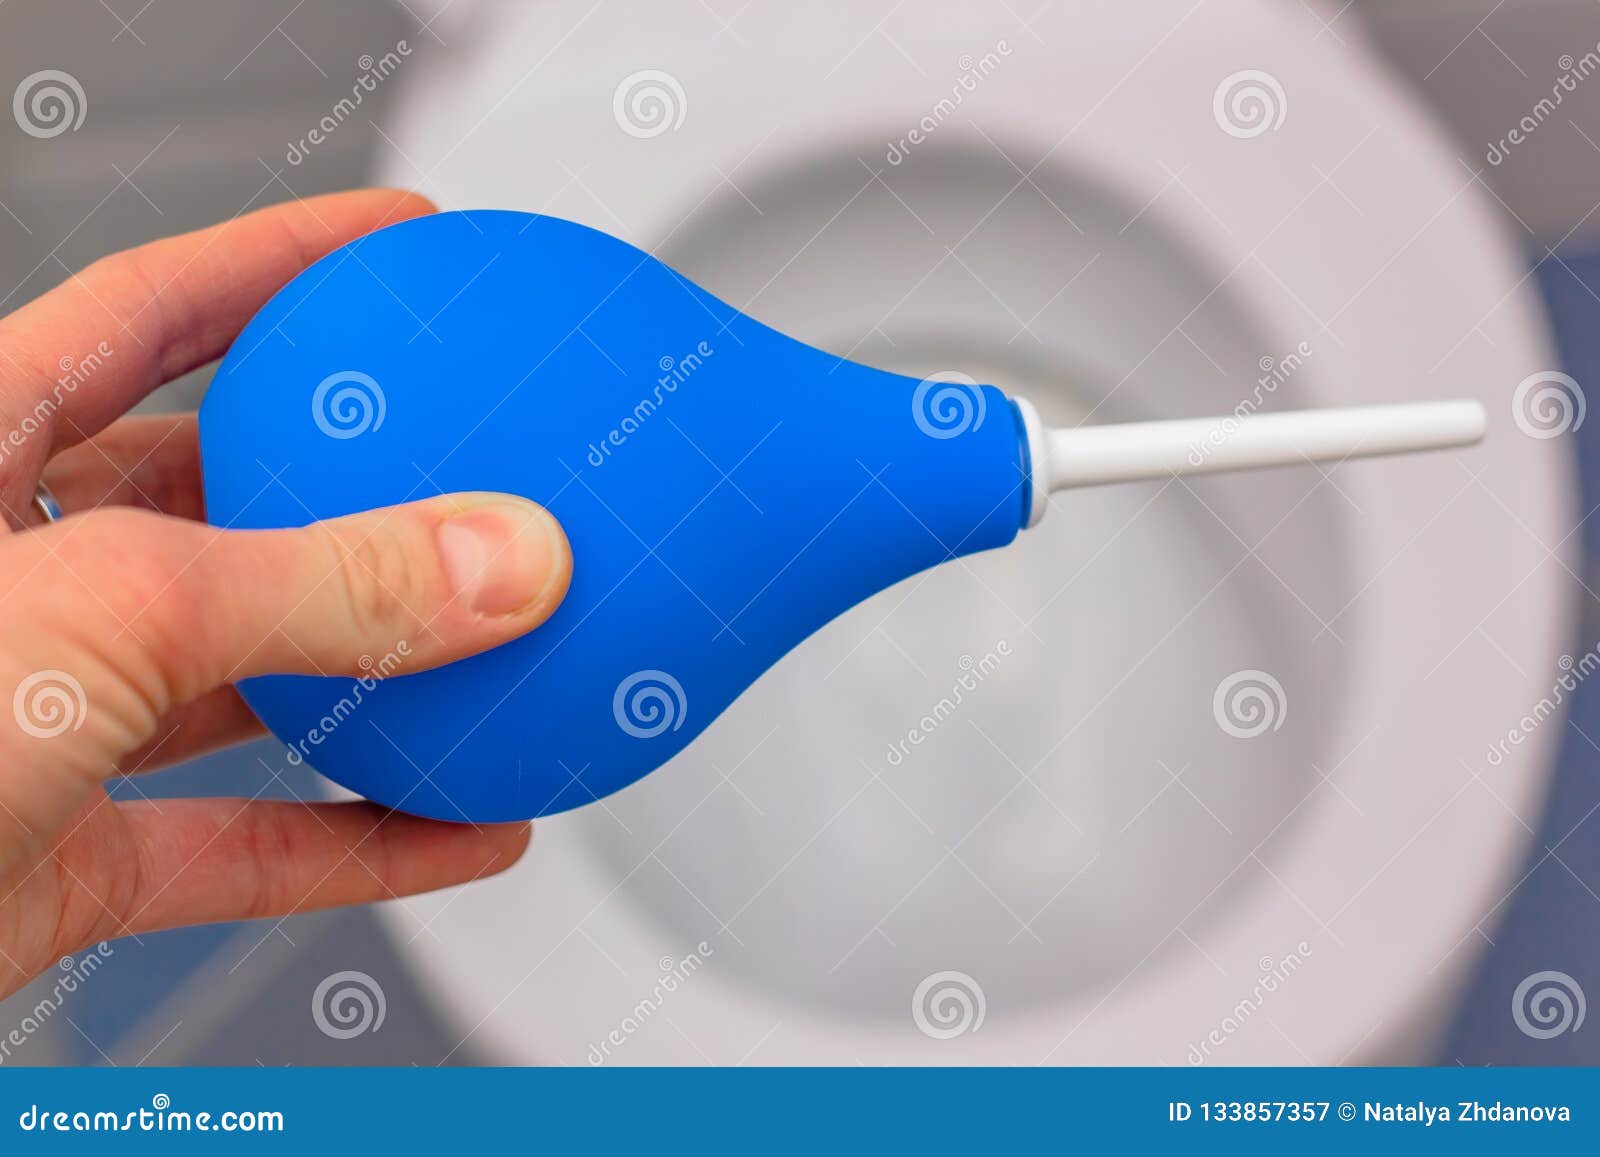 blue medical enema on the background of a white toilet